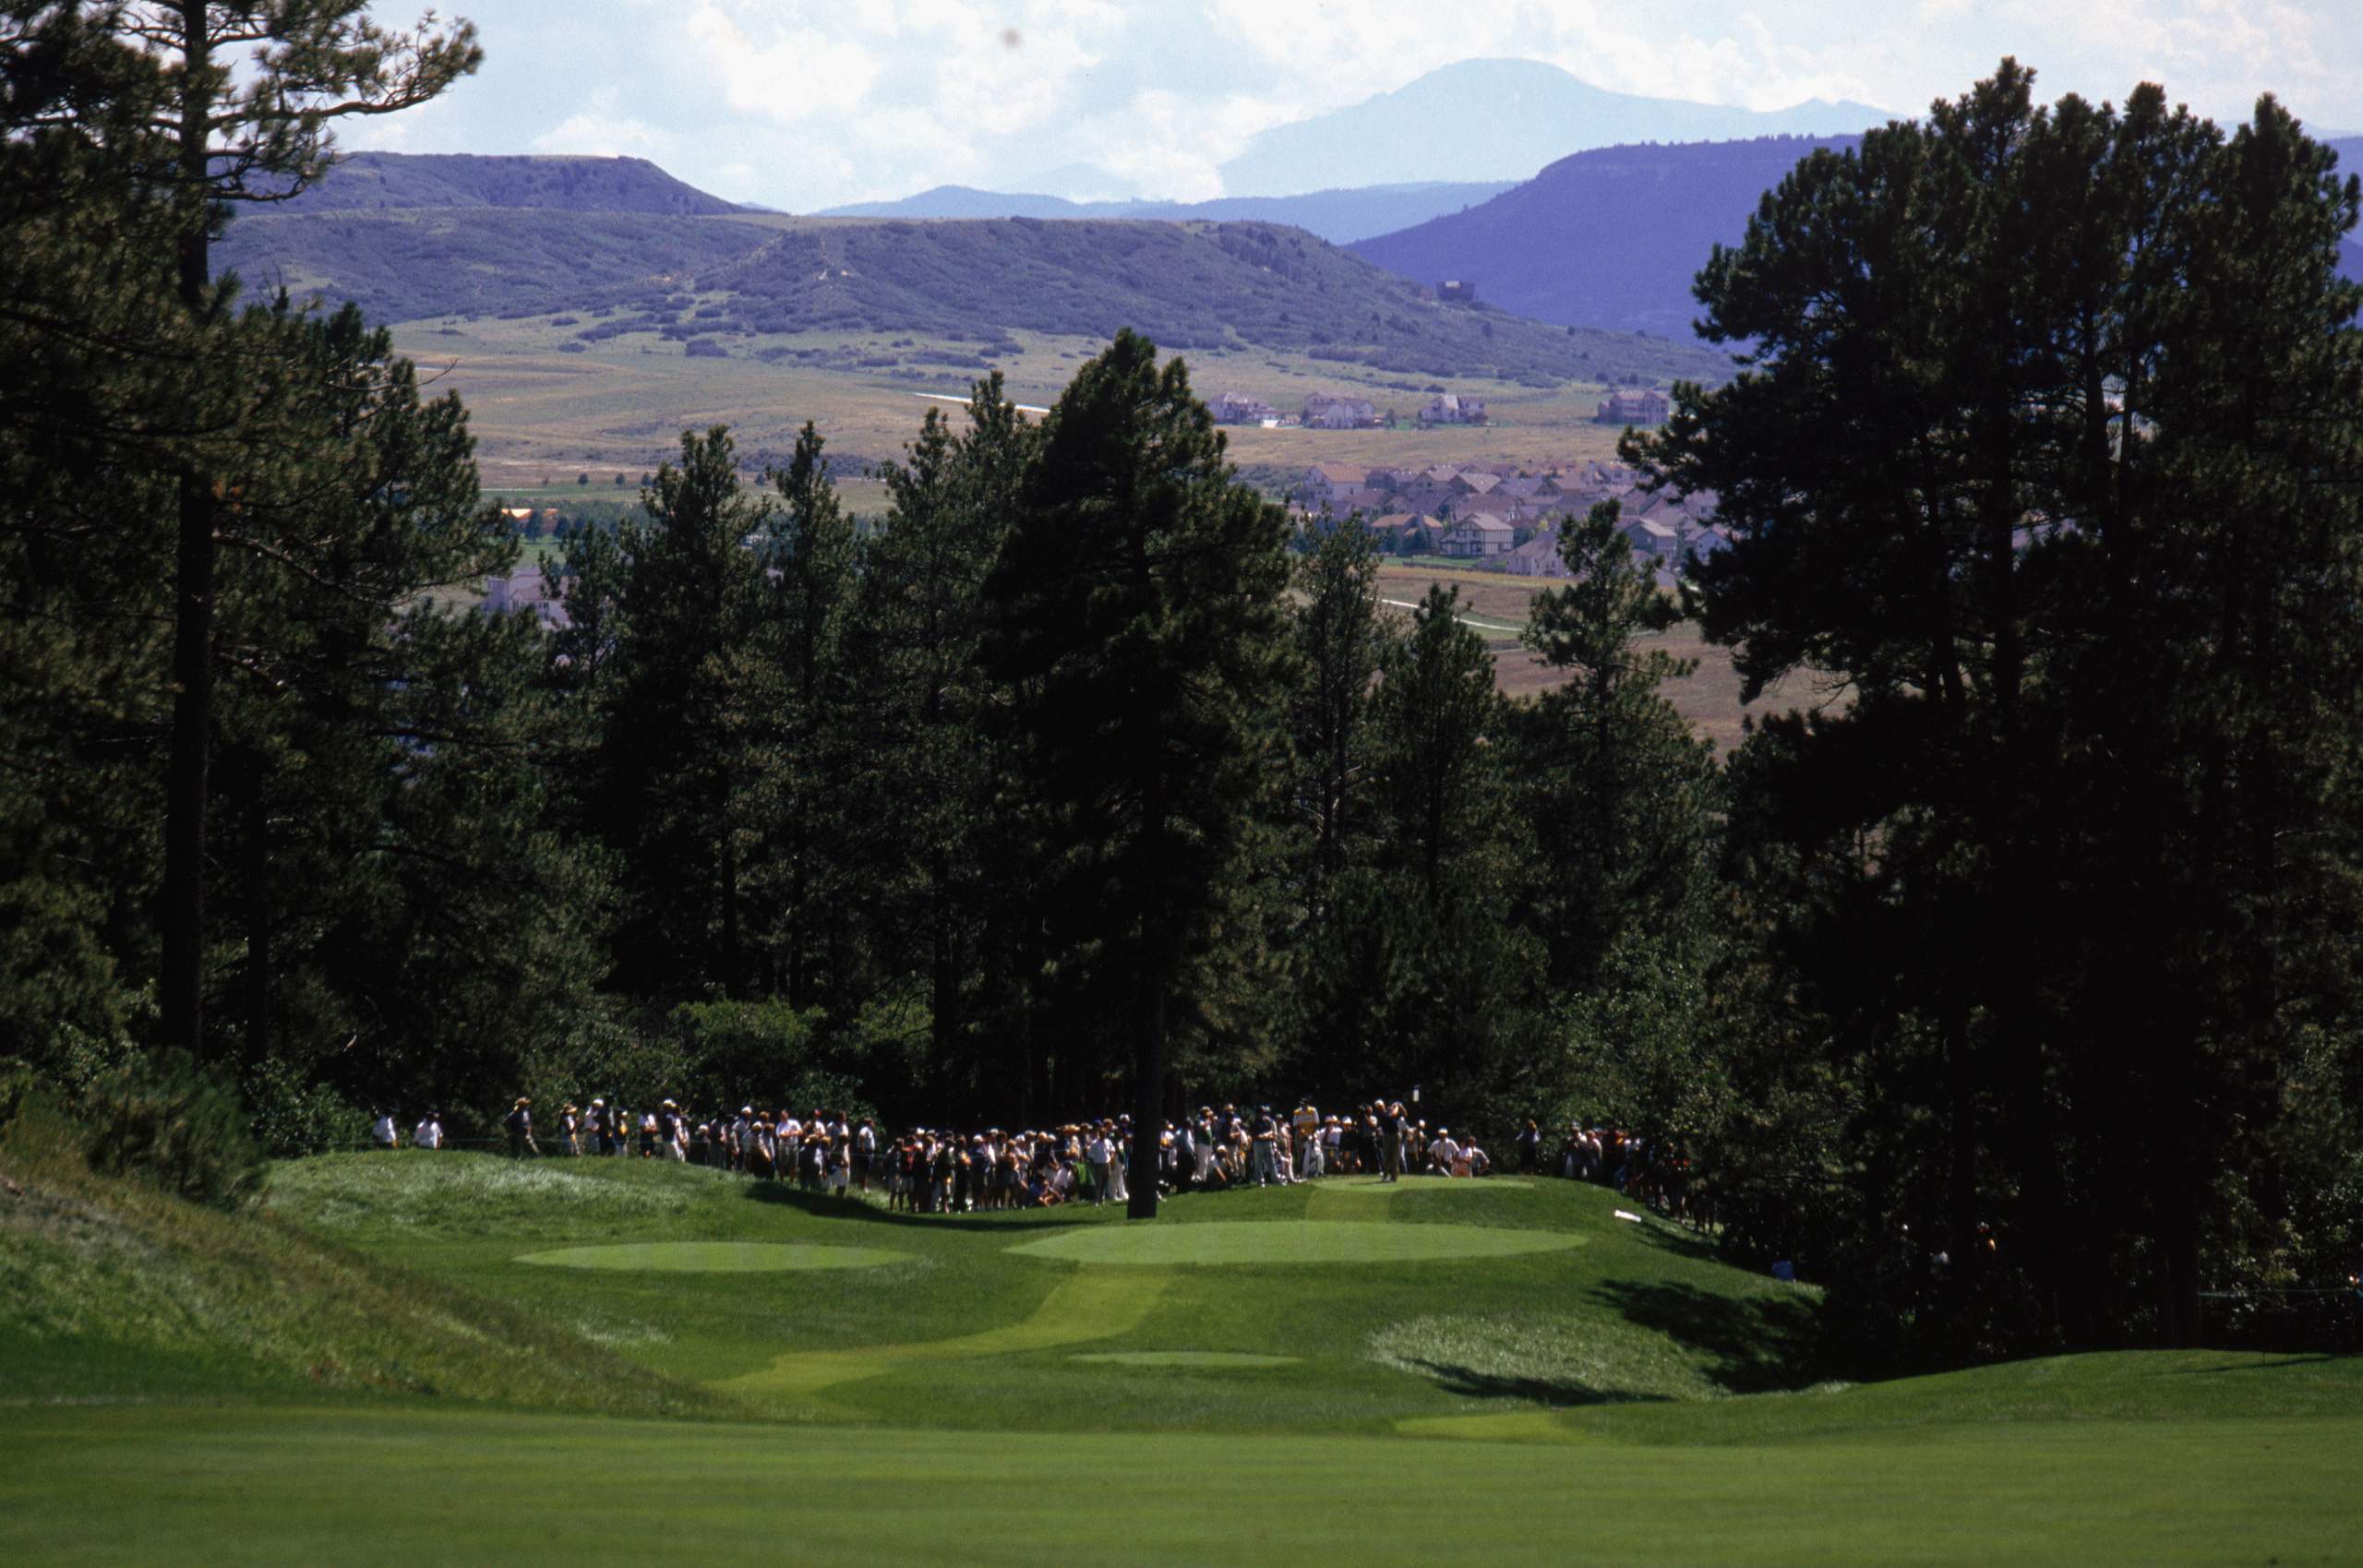 <em><b>Course Location: Castle Rock, Colorado</b></em> In 1969, Jack Vickers embarked on a journey to familiarize himself with Denver's landscape, leading him to discover the breathtaking property that would later become Castle Pines Golf Club. After stumbling upon a dirt lane and ascending a rocky ridge, he was captivated by the panoramic views of Colorado's natural beauty, envisioning it as the ideal location for his envisioned world-class golf course. After 12 years of negotiating, Vickers struck a deal with local landowners to secure the acreage needed for his dream project. With the site established, Vickers enlisted Jack Nicklaus as the course designer, despite their occasional disagreements, resulting in the creation of one of the nation's premier golfing destinations. Construction commenced in 1979, culminating in the grand opening of Castle Pines Golf Club in October 1981.